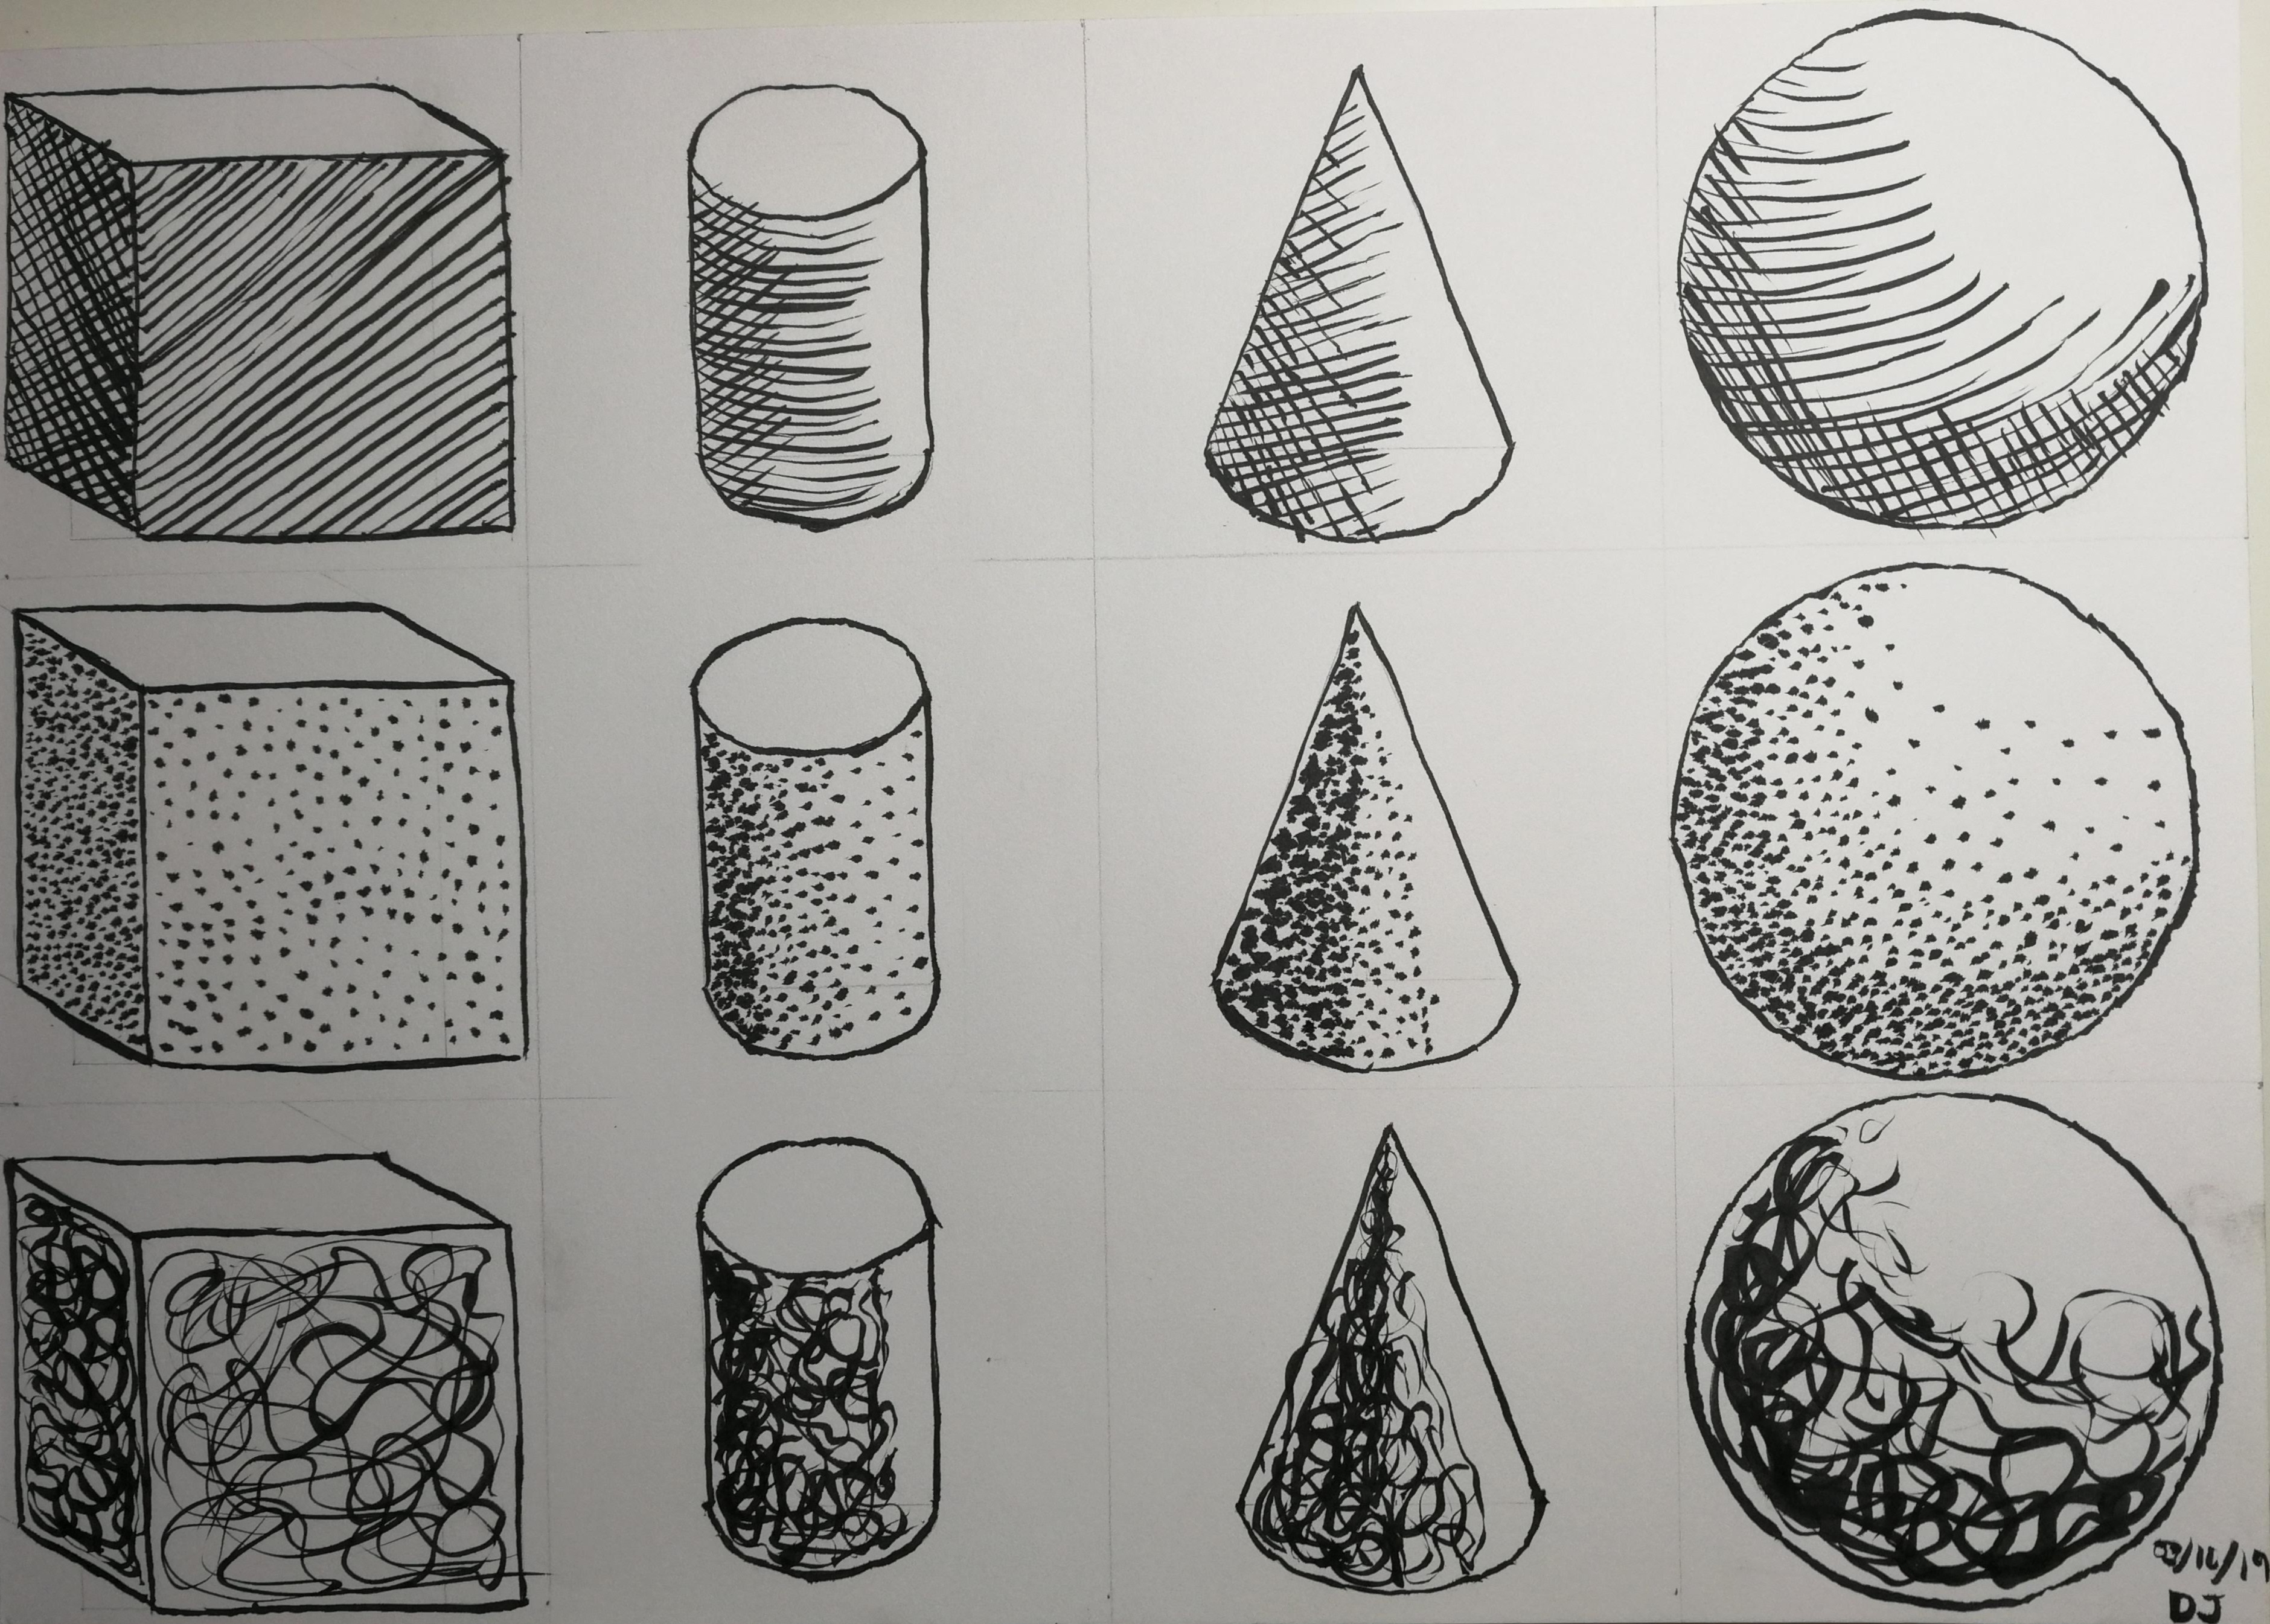 &ldquo;Shading basic forms with pen and ink for day 3 of Inktober 2019&rdquo;